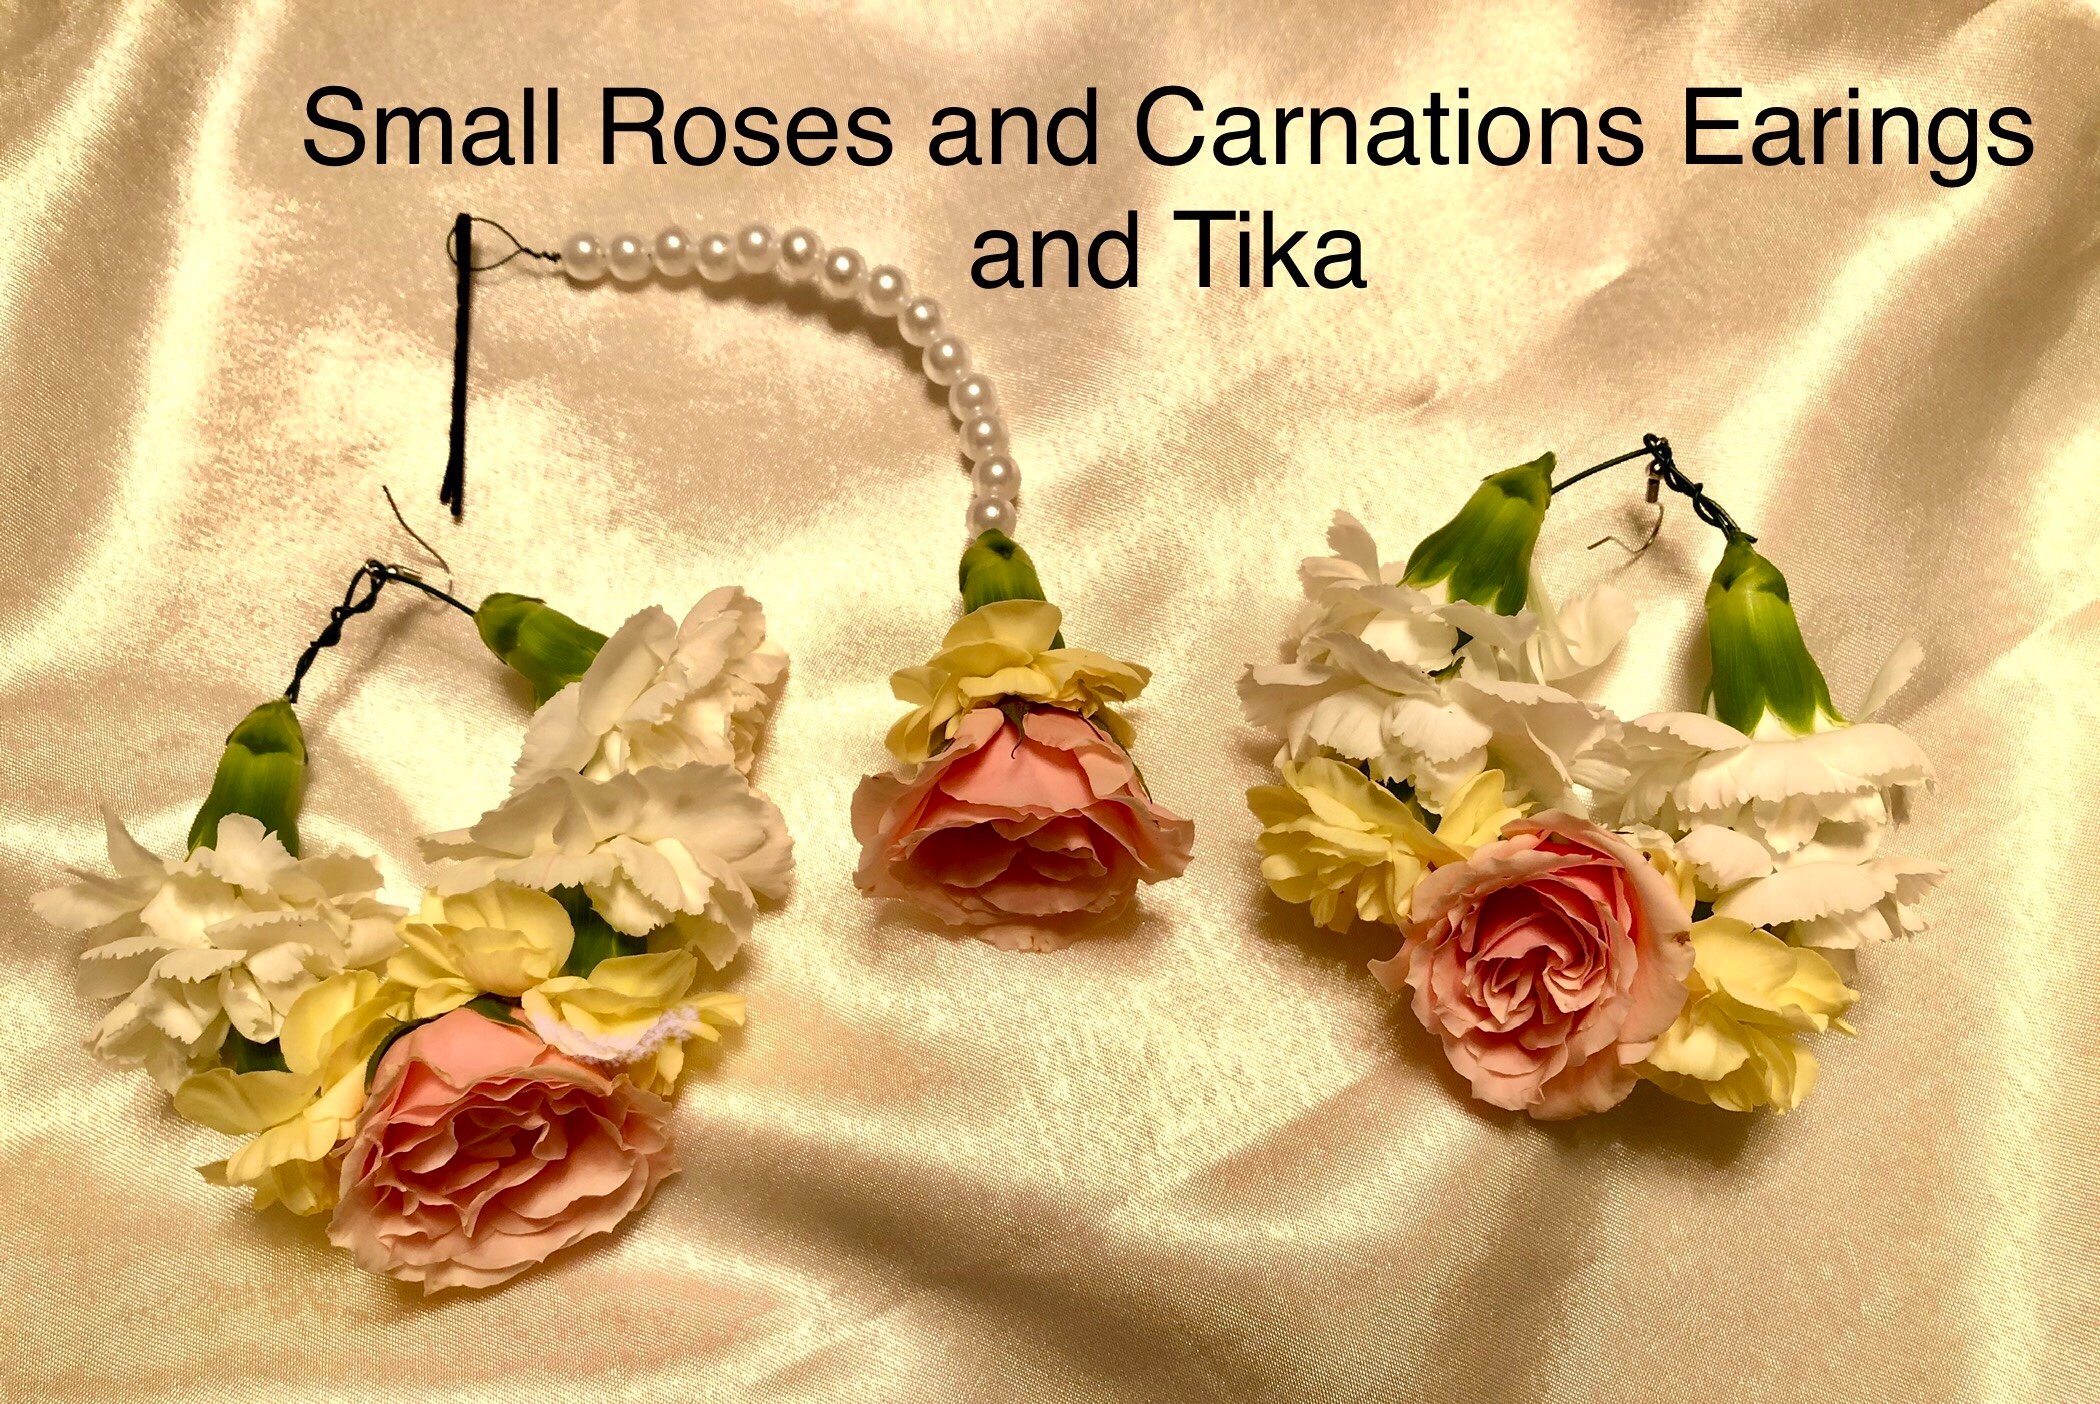 $50  Small Roses and Carnations Earings and Tika set